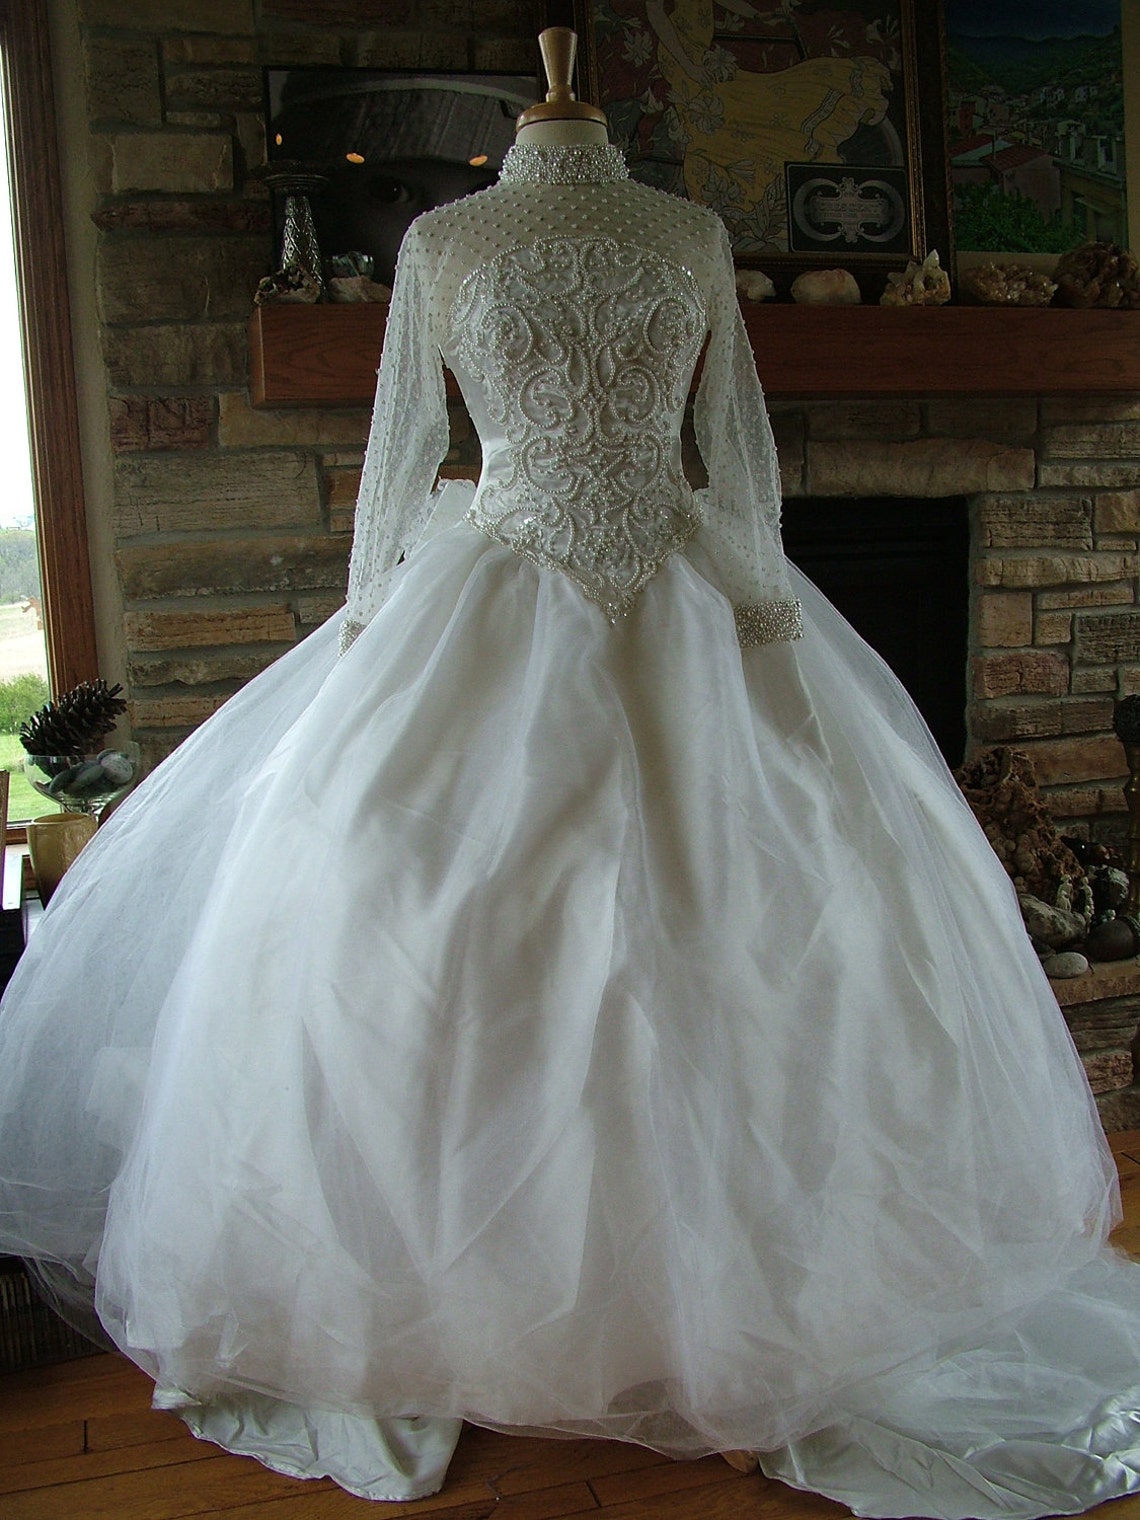 Wedding Dress Vintage Pearl Beaded Bridal Gown Ballgown Tulle - Etsy